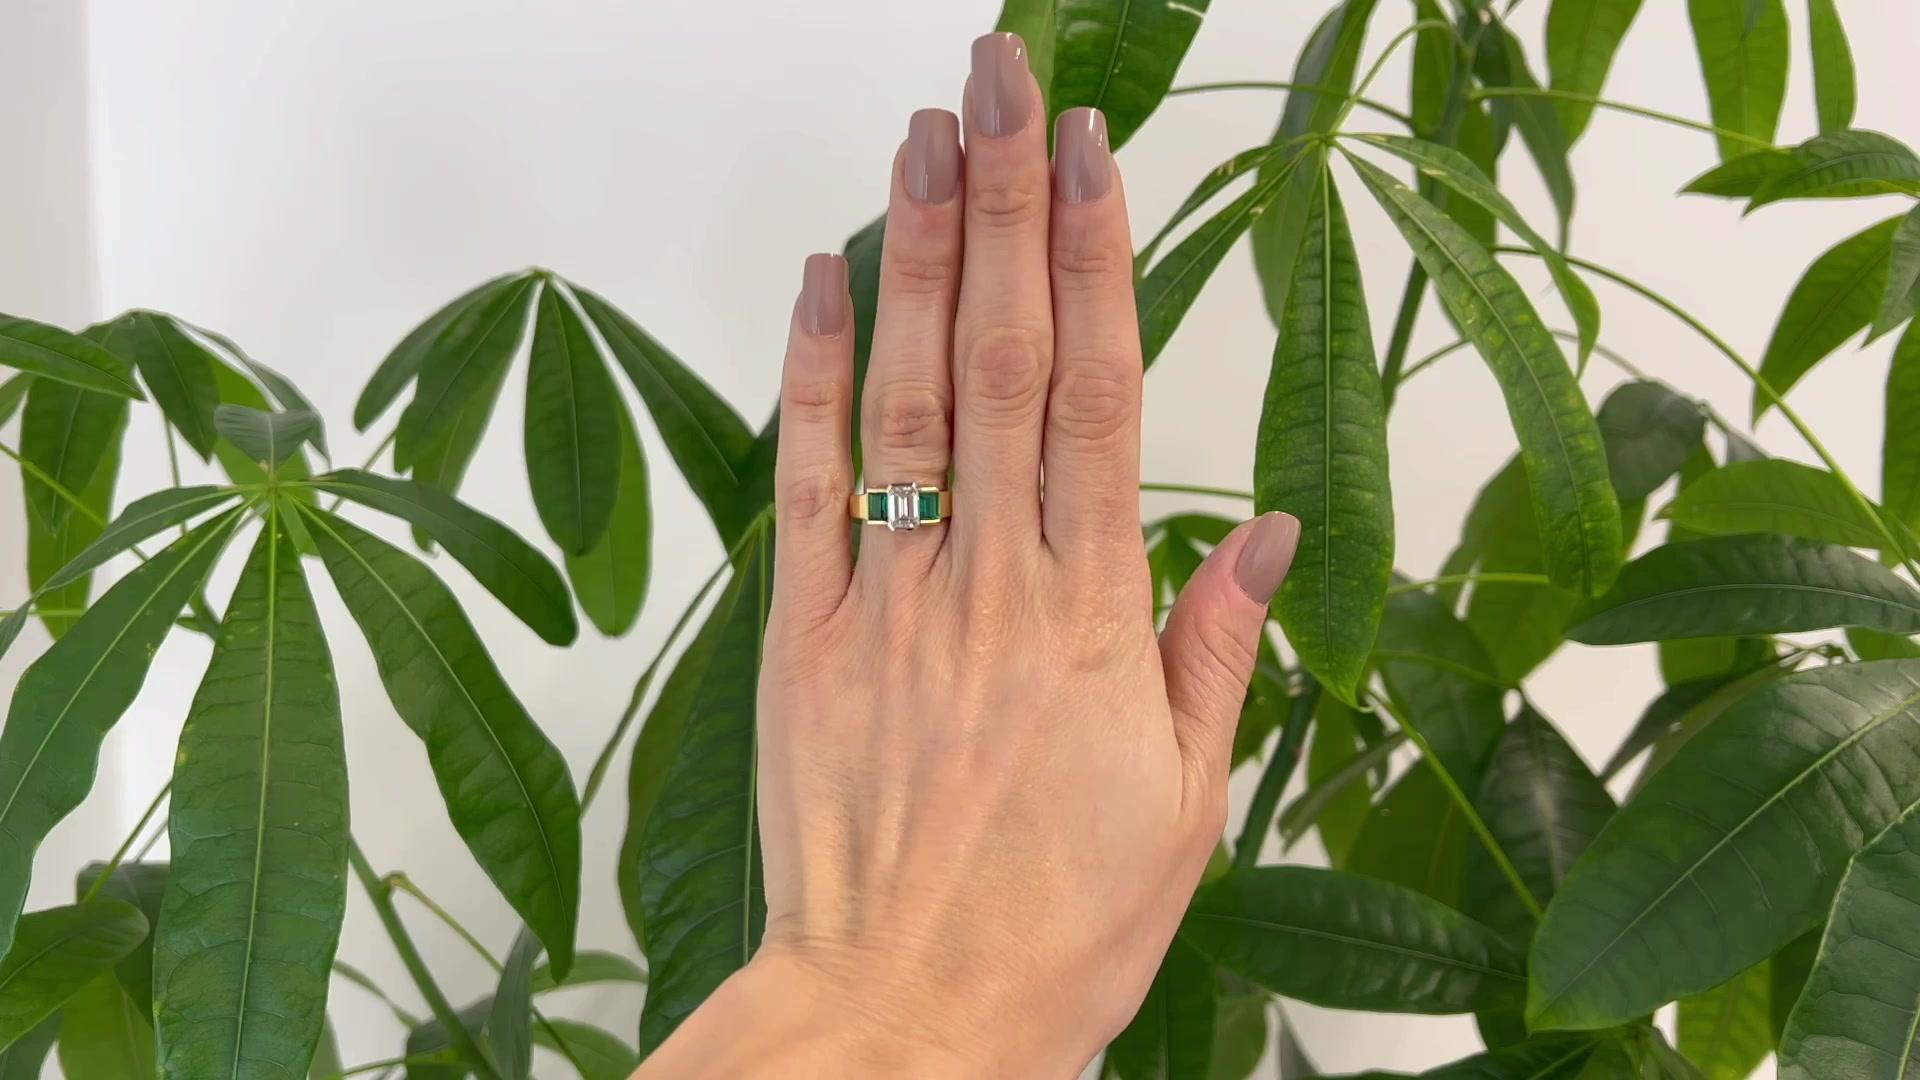 One Vintage GIA 1.53 Carats Emerald Cut Diamond Emerald 18k Yellow Gold Three Stone Ring. Featuring one GIA emerald cut diamond of 1.53 carats, accompanied with GIA #1288301172 stating the diamond is E color, SI1 clarity. Accented by two rectangular